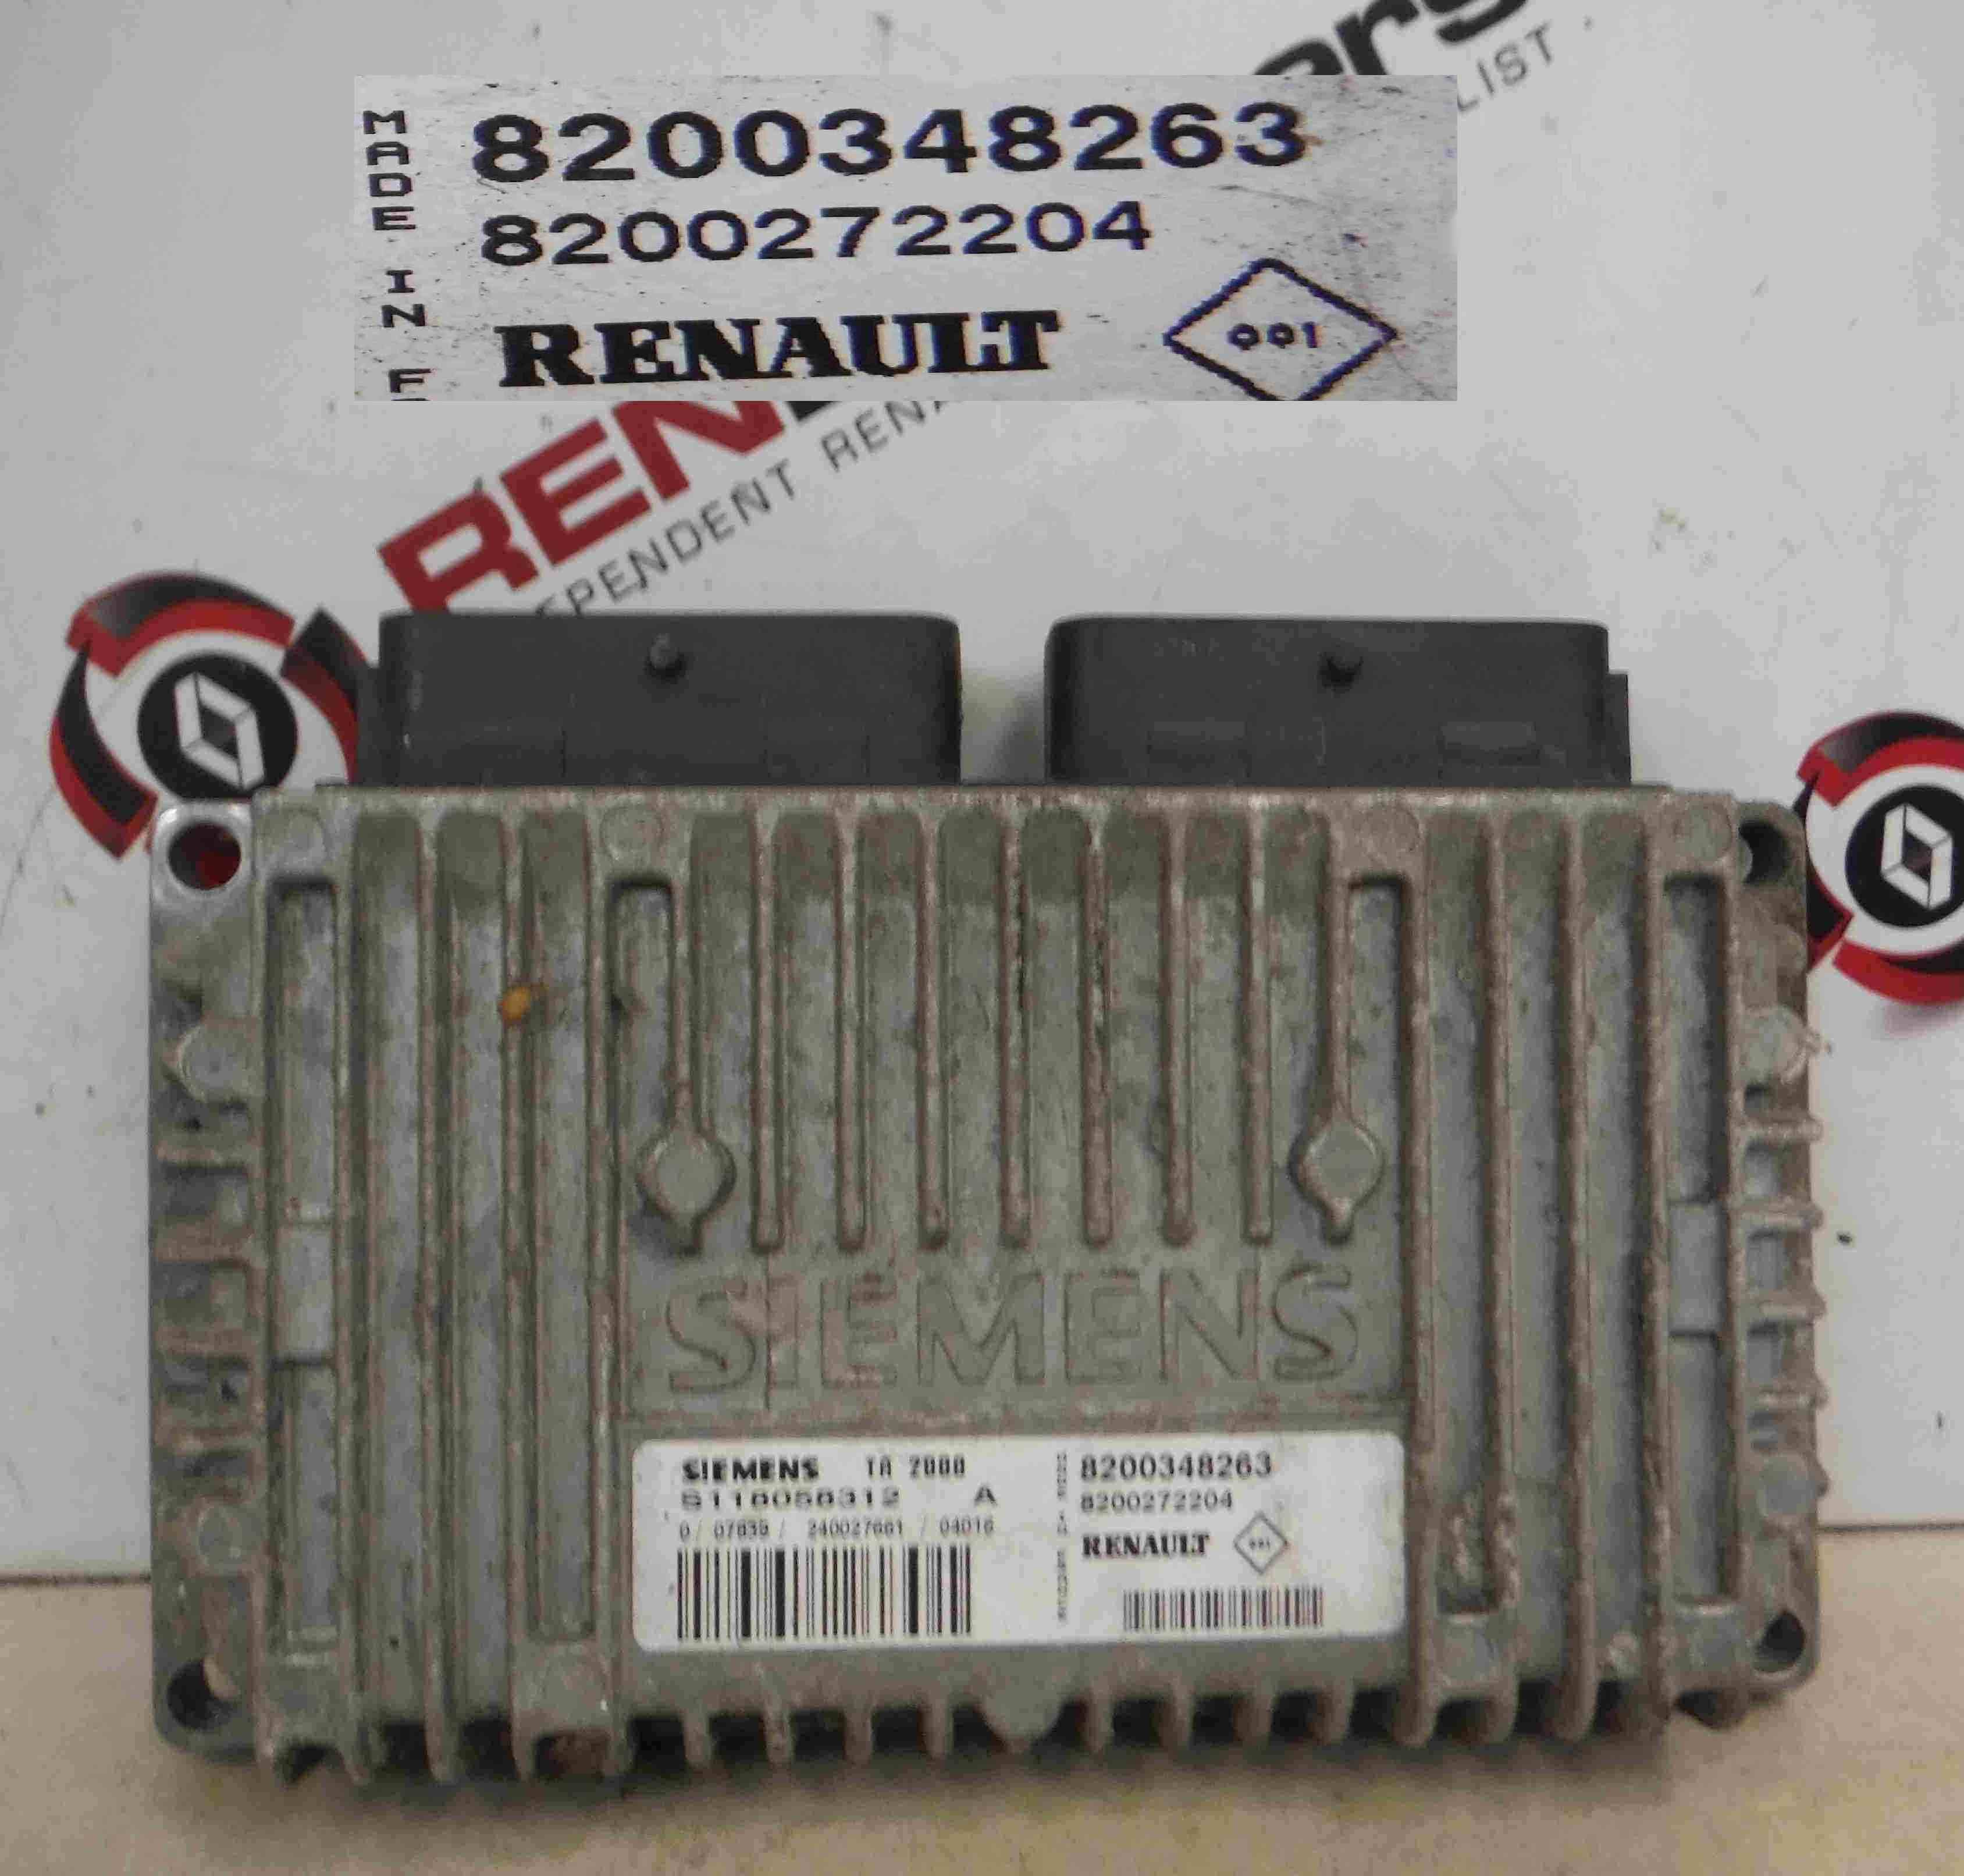 Renault Megane Scenic 2003-2009 1.6 16v Automatic Gearbox ECU Computer